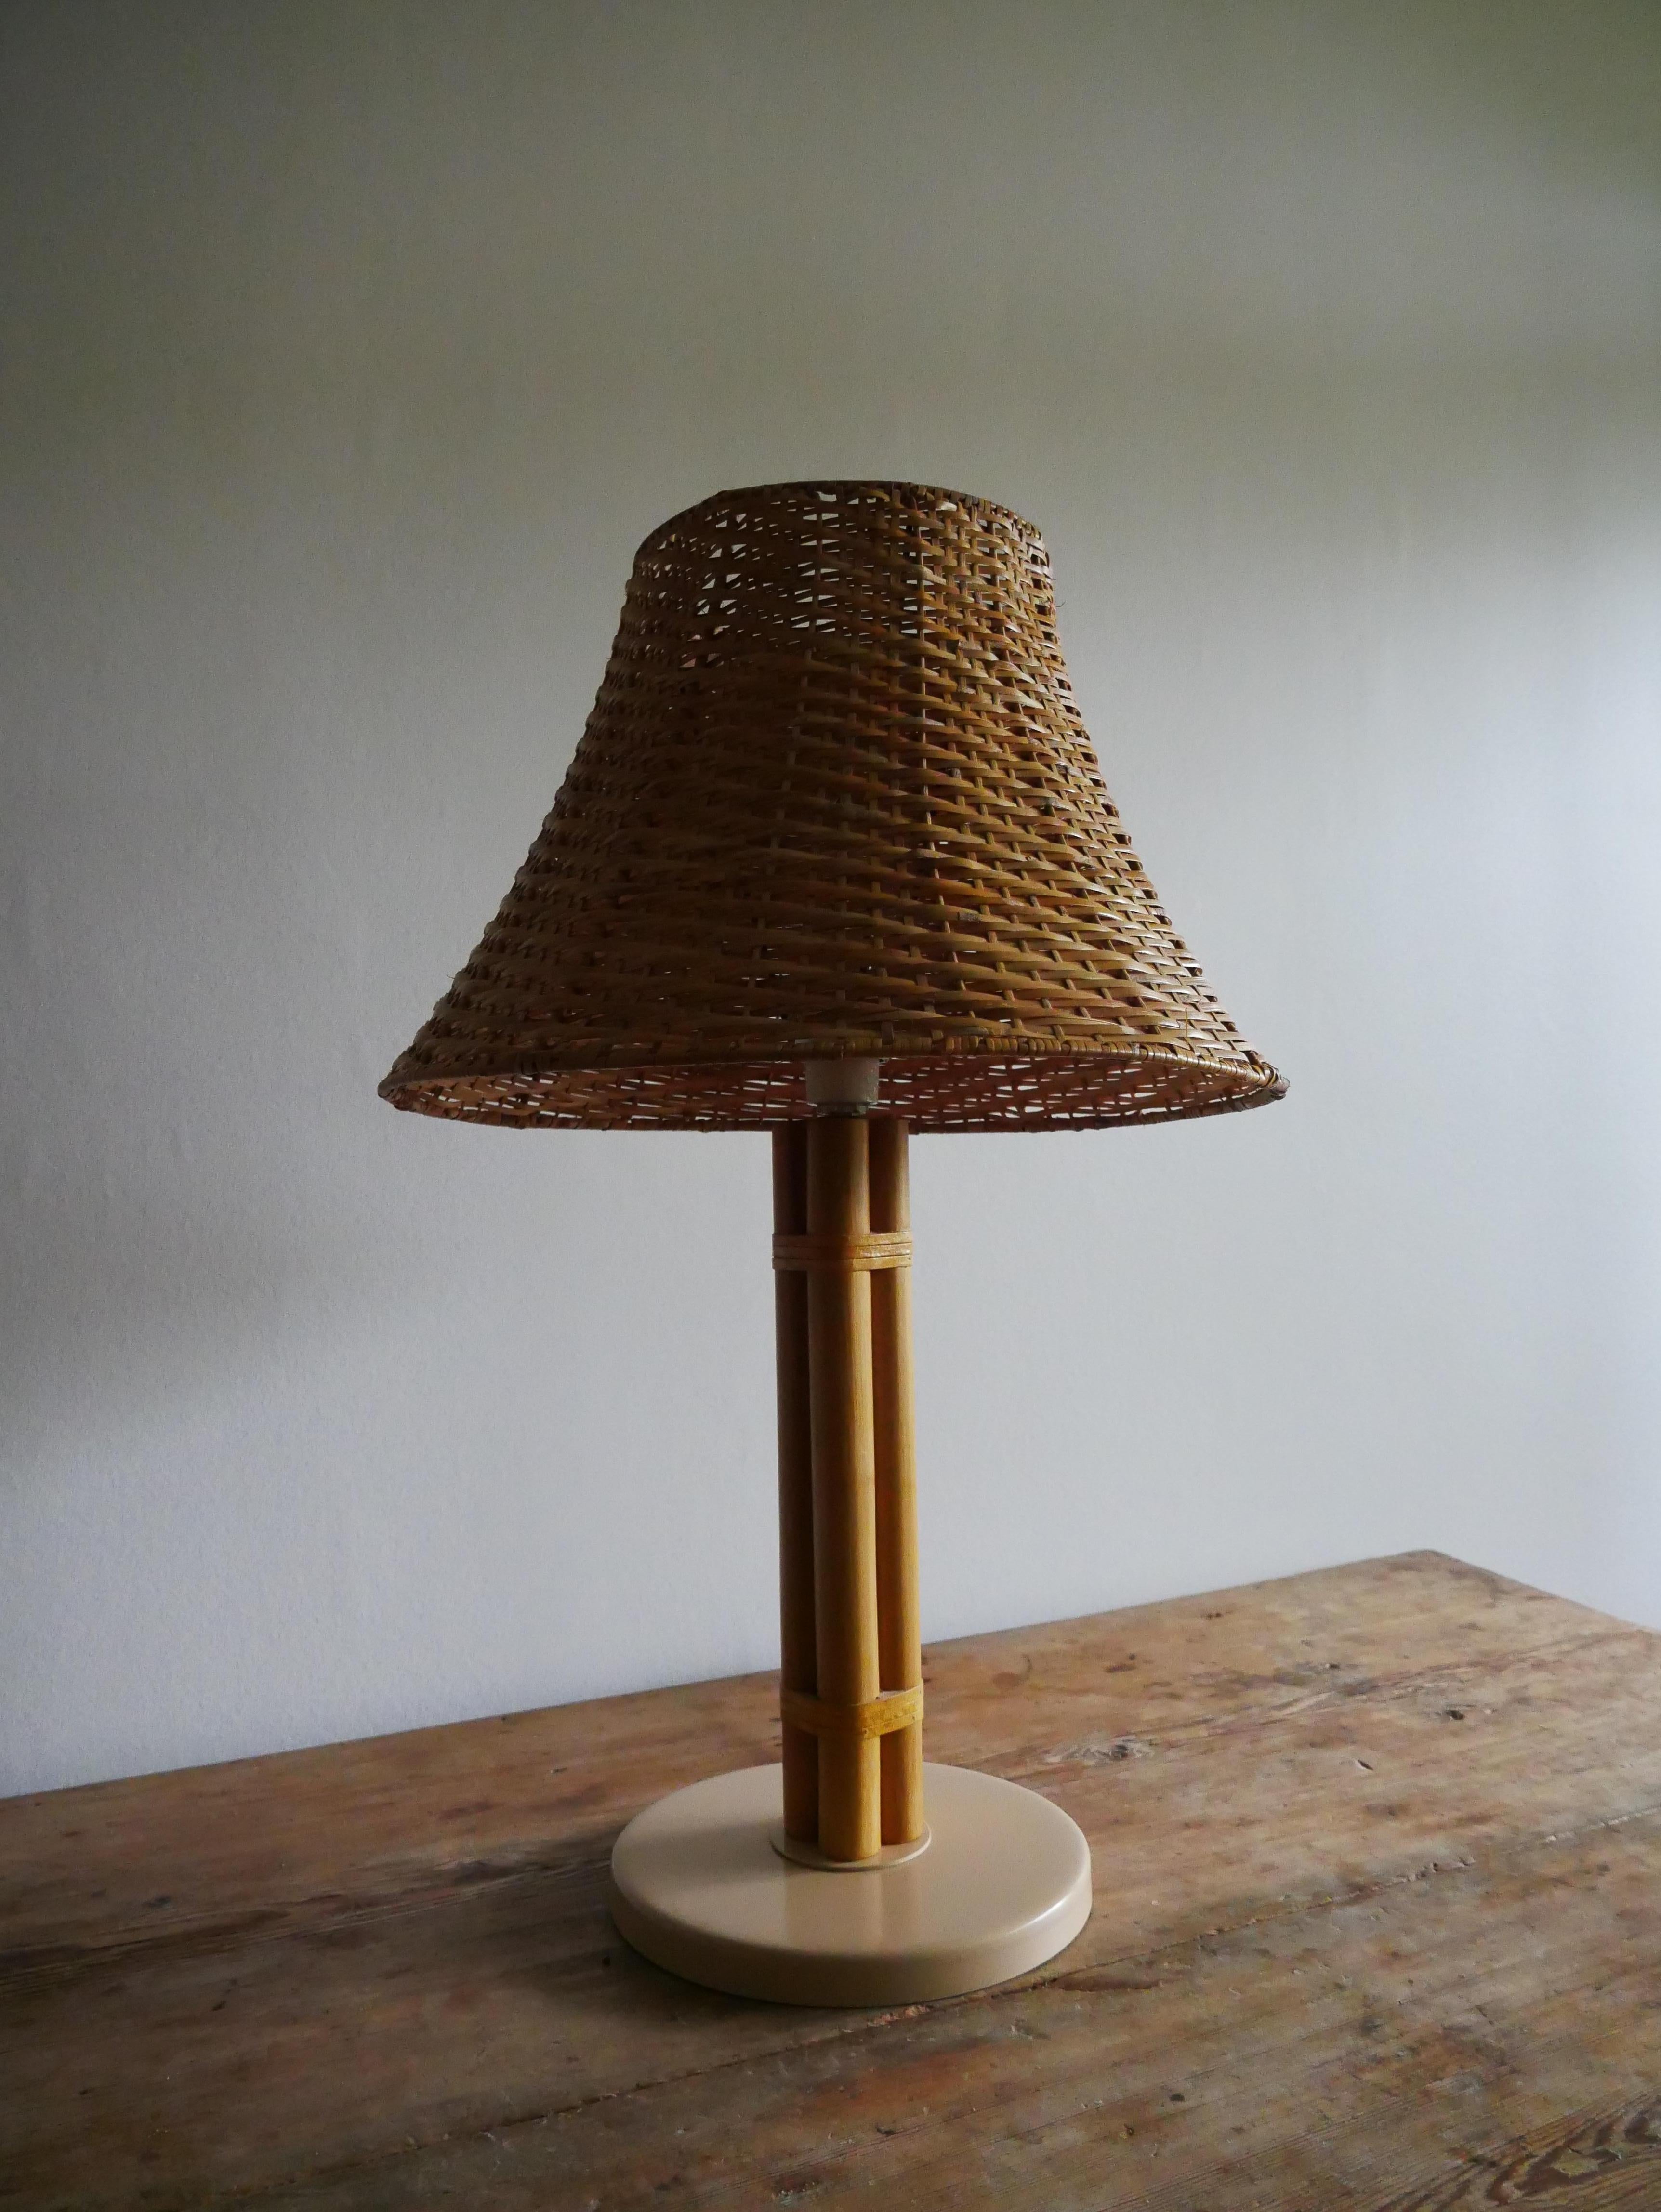 Scandinavian midcentury table lamp in brass and bamboo by Bergboms, Sweden, 1960s.

Model B-105.

This lamp is made of bamboo with details in leather.

The lamp comes with a rattan lampshade.